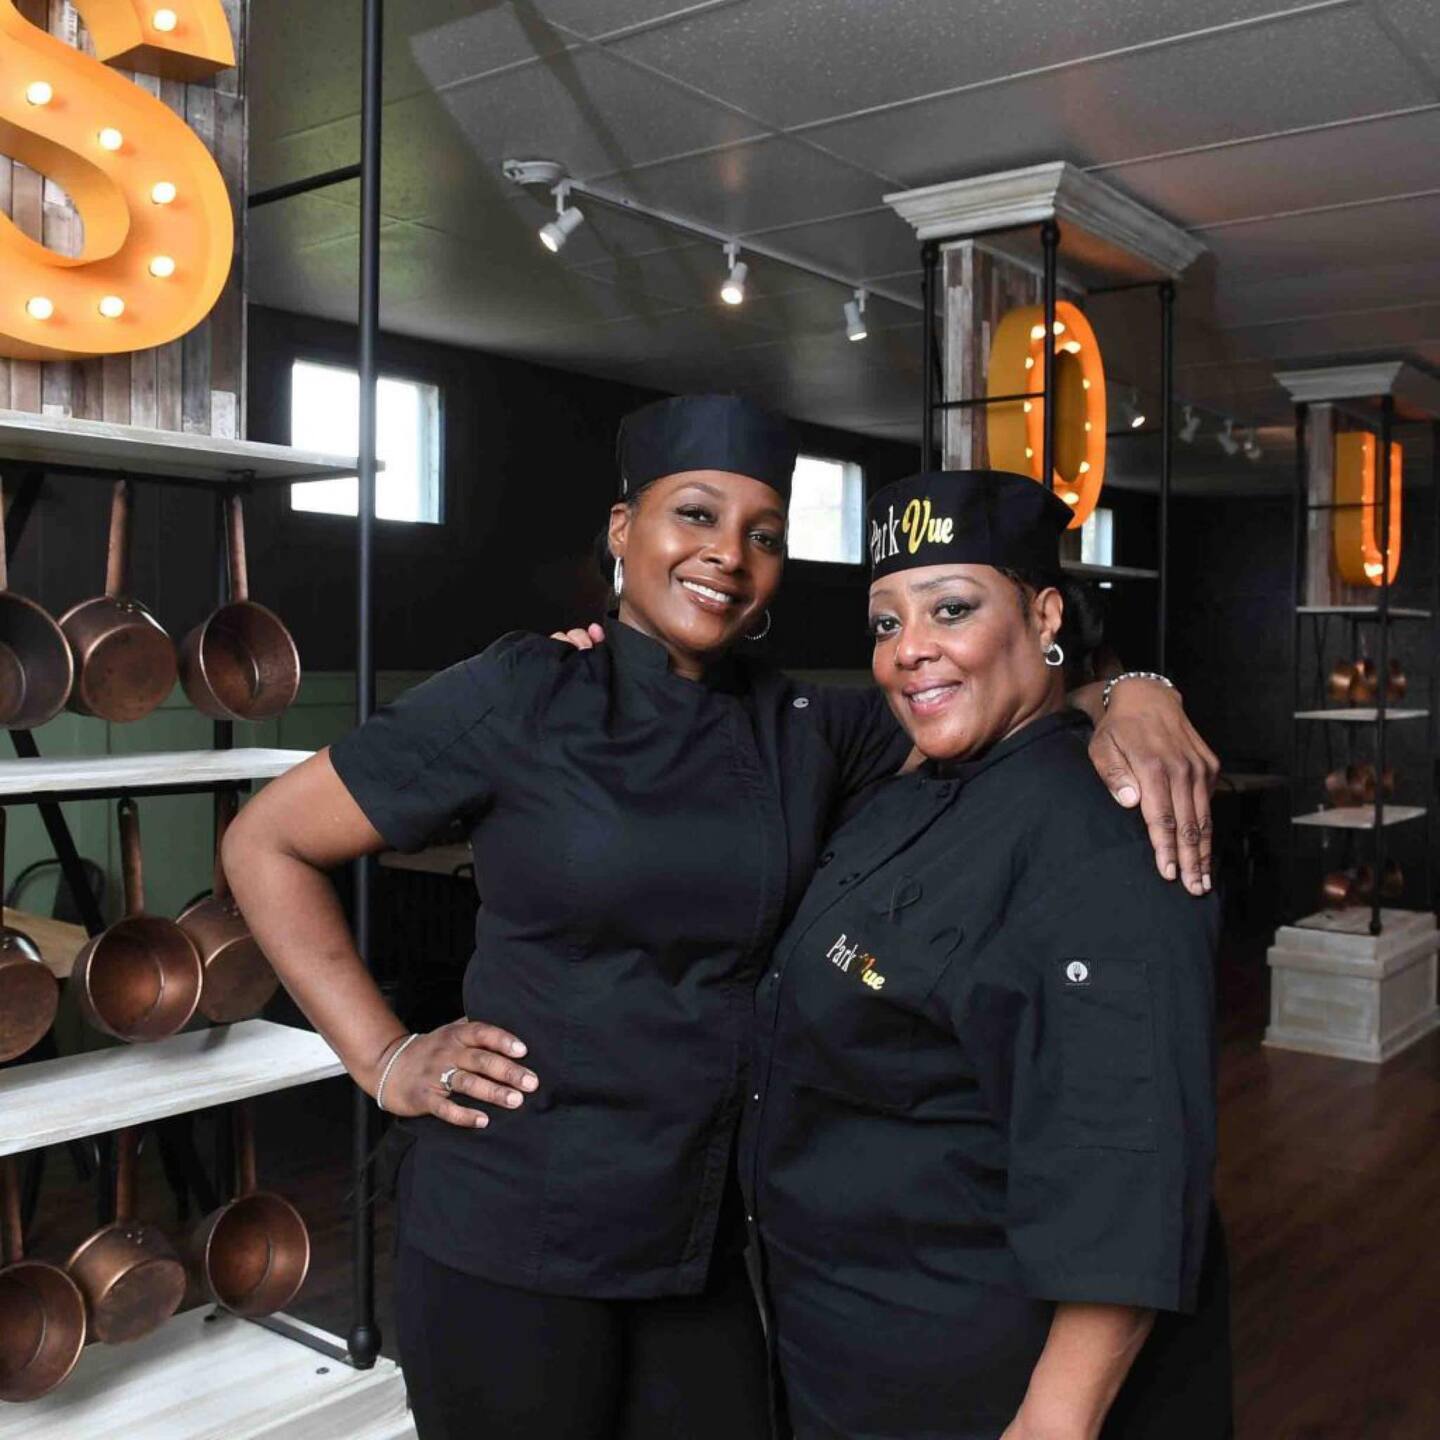 Harrita West (l.) and Schenita Williams (r.), daughter-mother co-owners, inside the dining room at Park Vue Soul Food Restaurant in Buffalo.